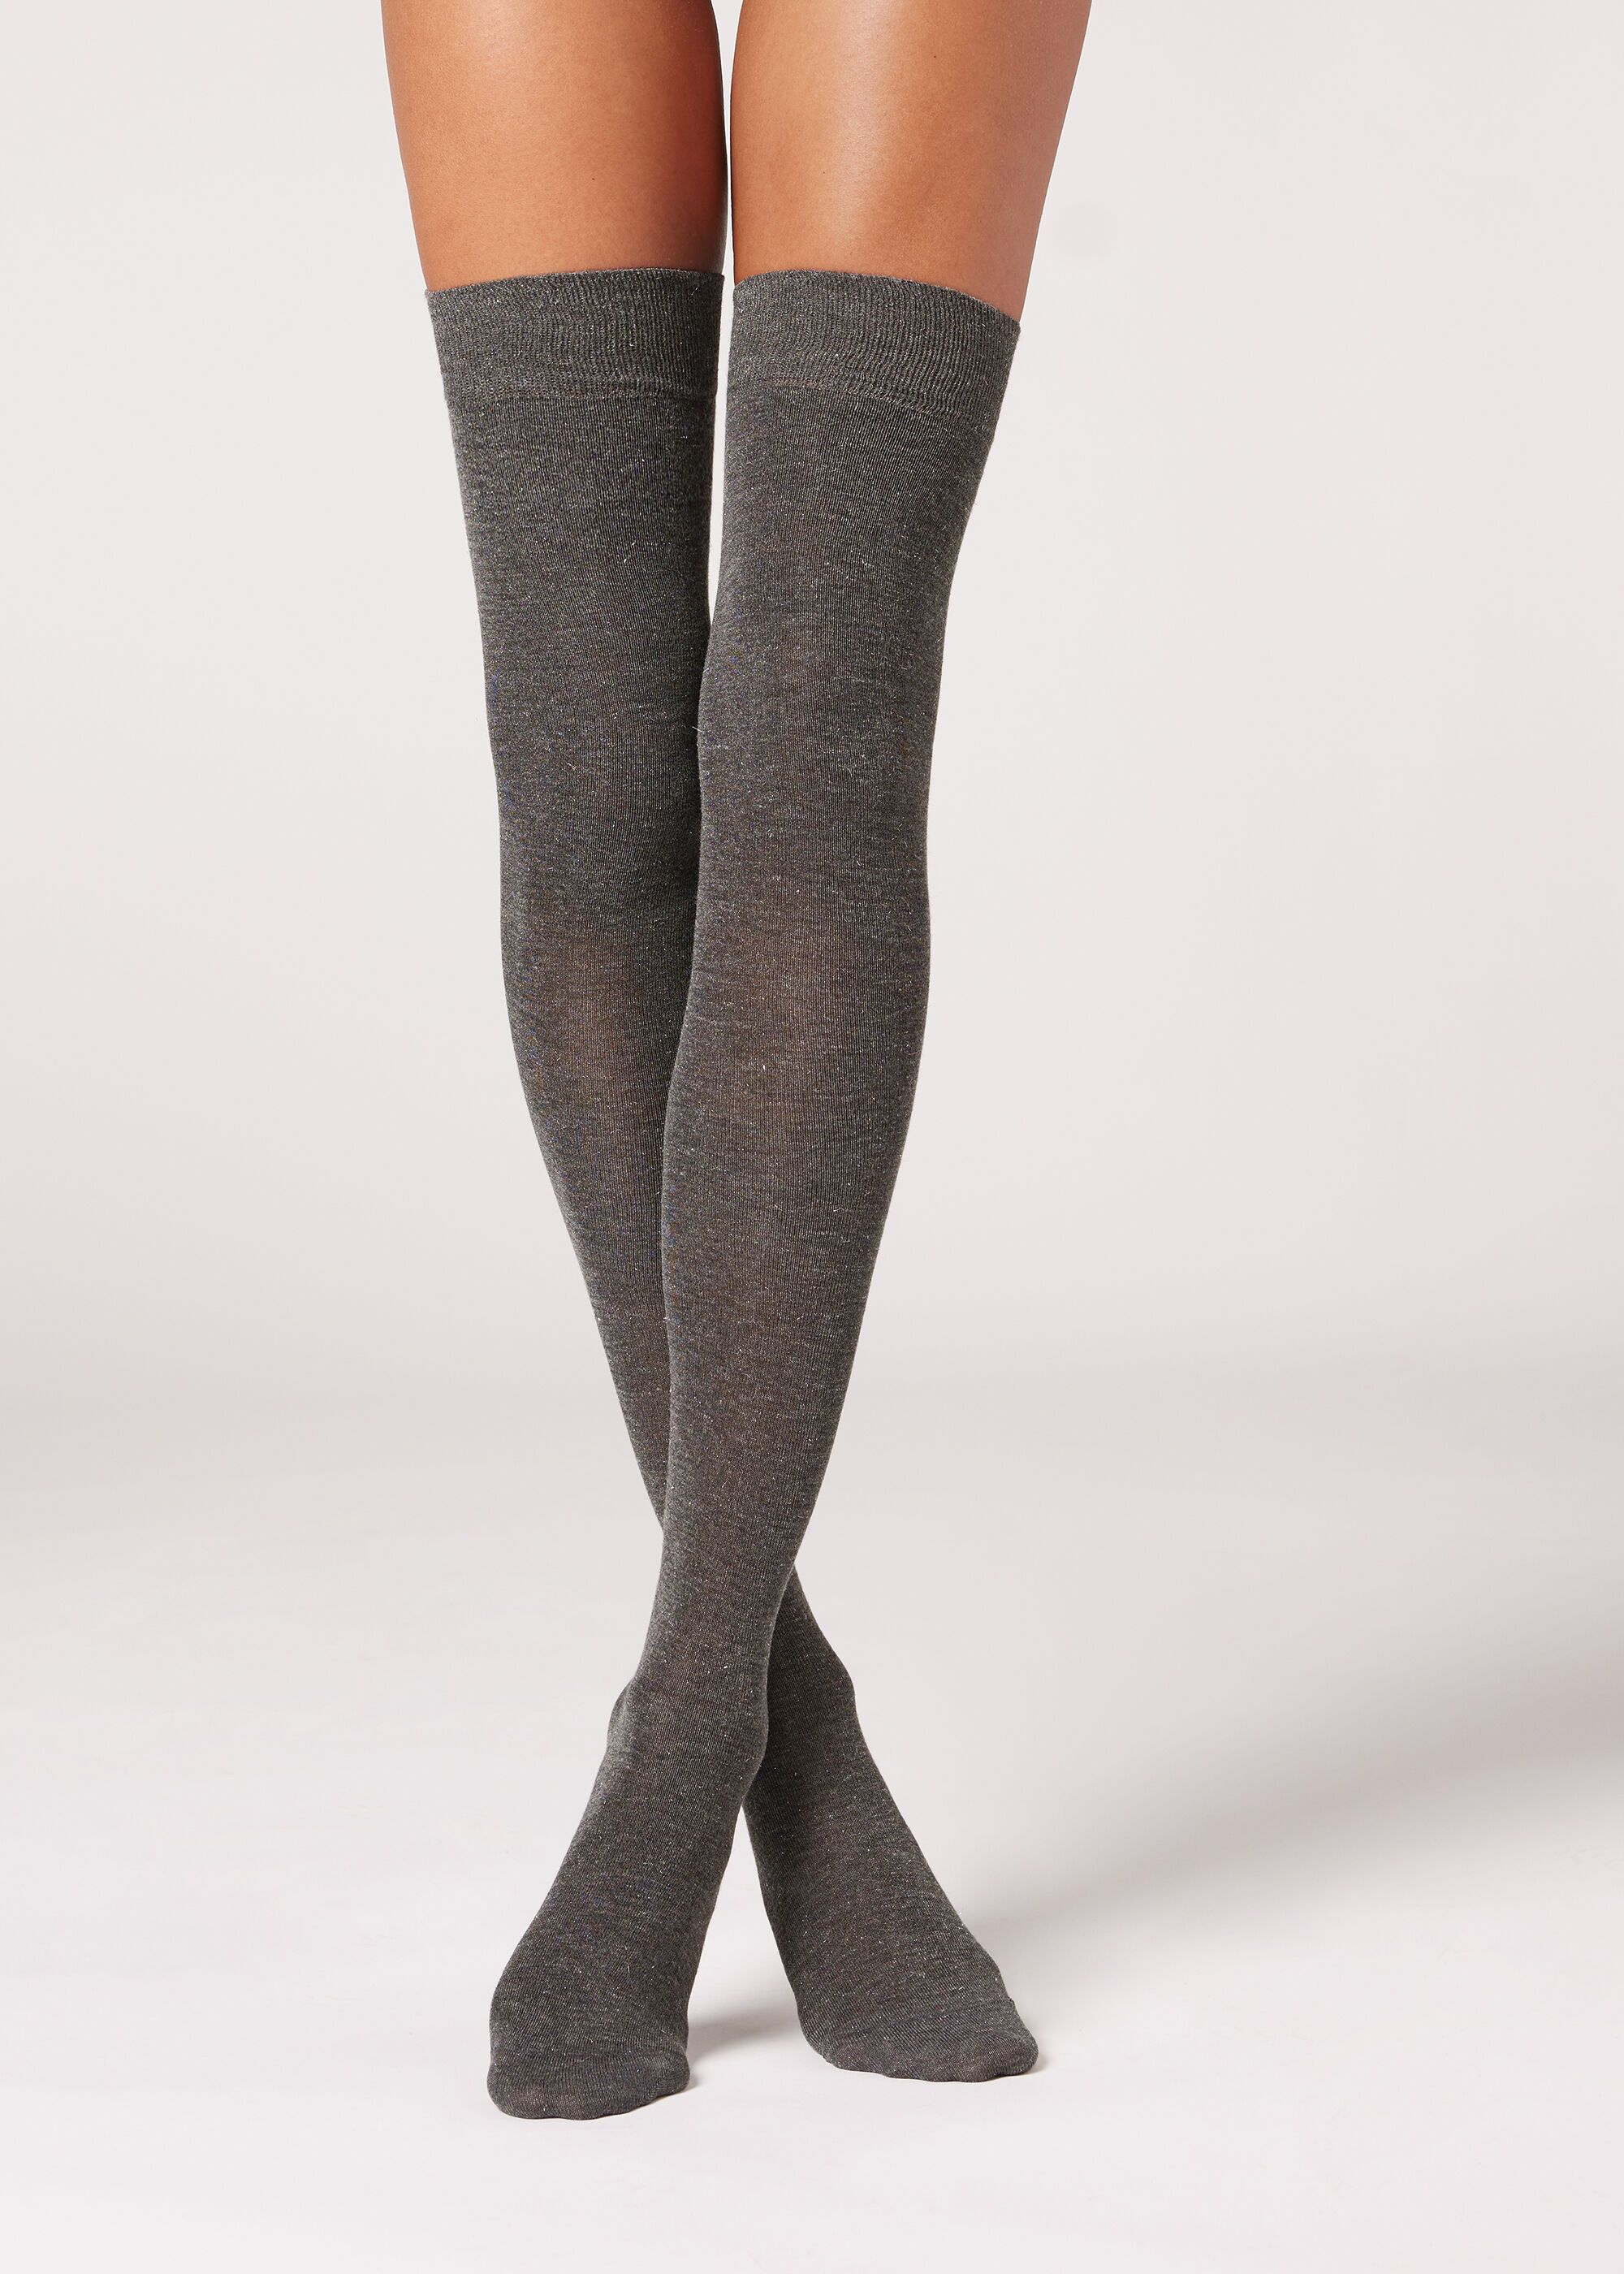 Cashmere and Glitter Over-the-Knee Socks | Calzedonia US